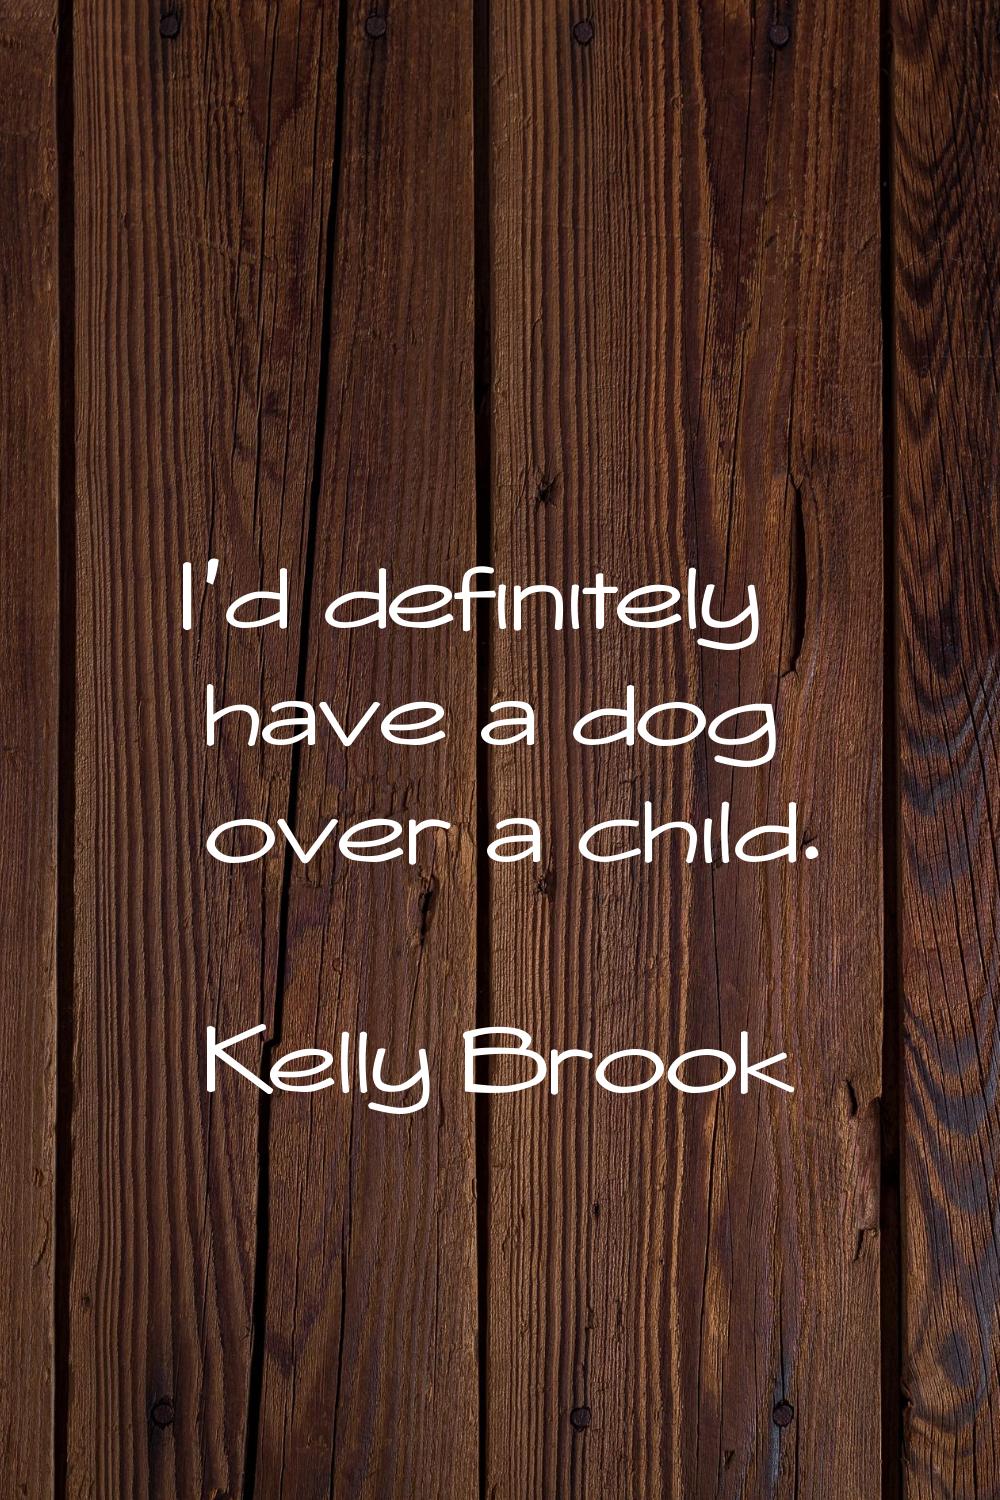 I'd definitely have a dog over a child.